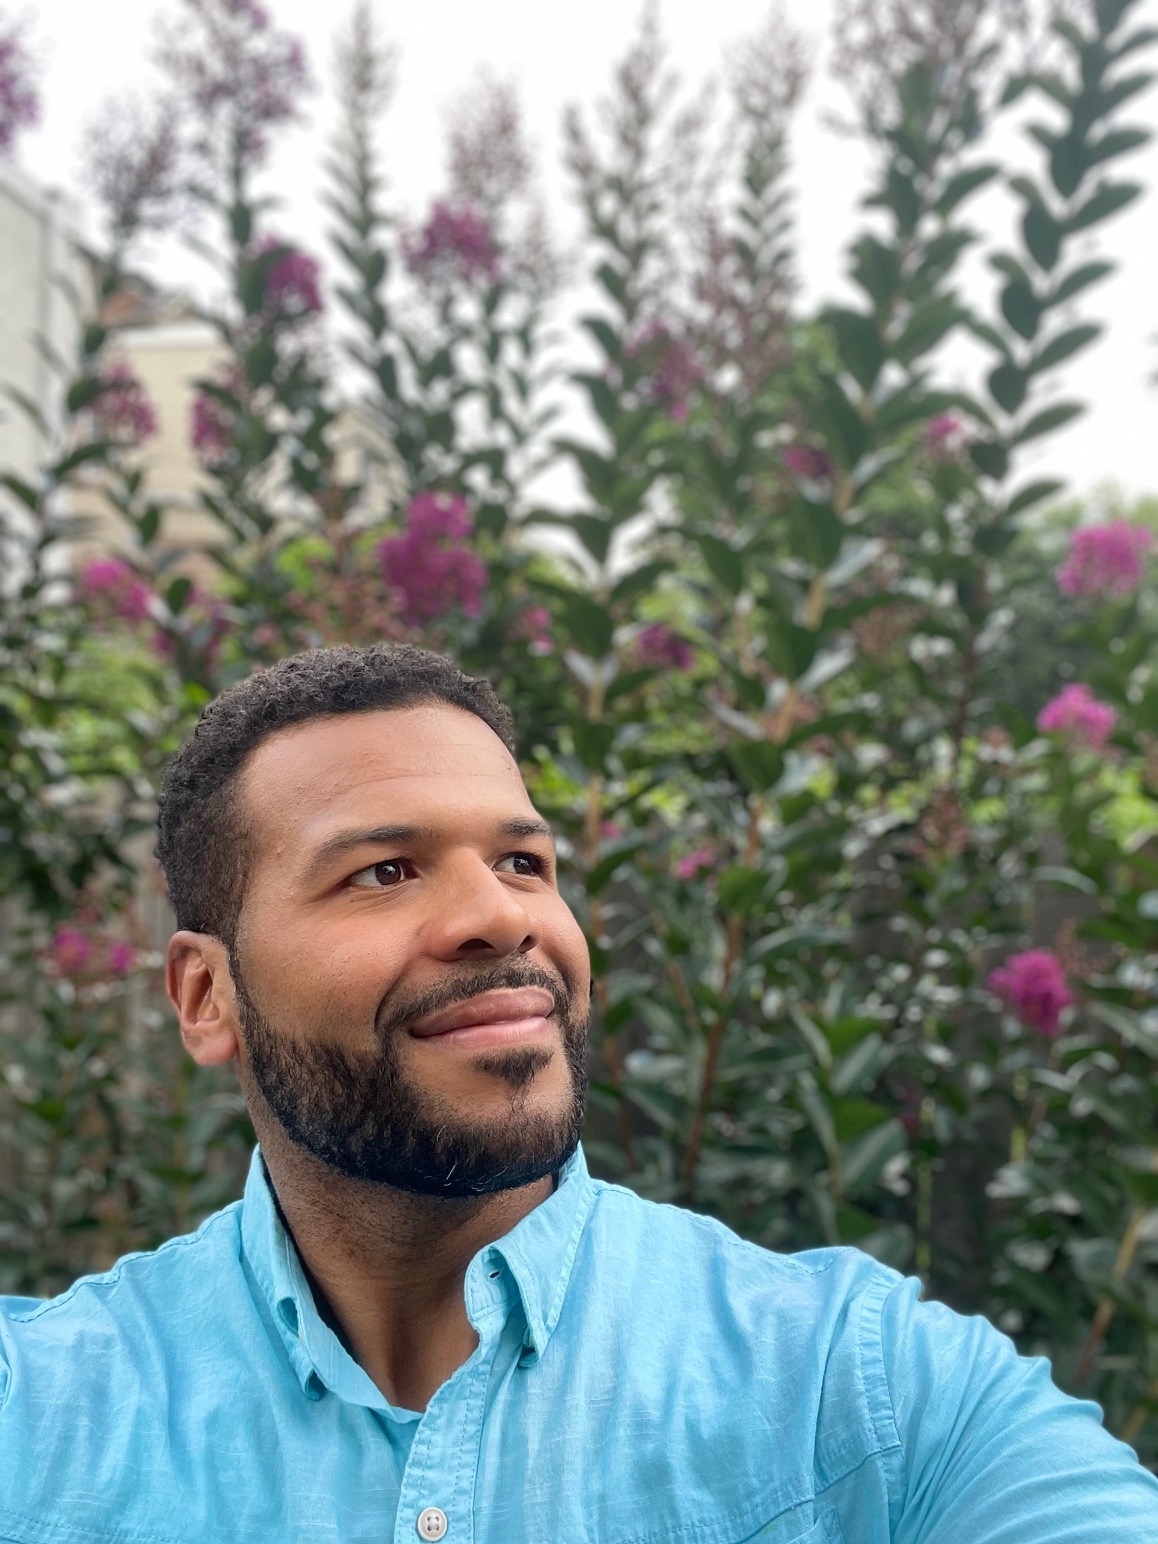 Orlando Perez in a blue shirt standing in front of flowers.